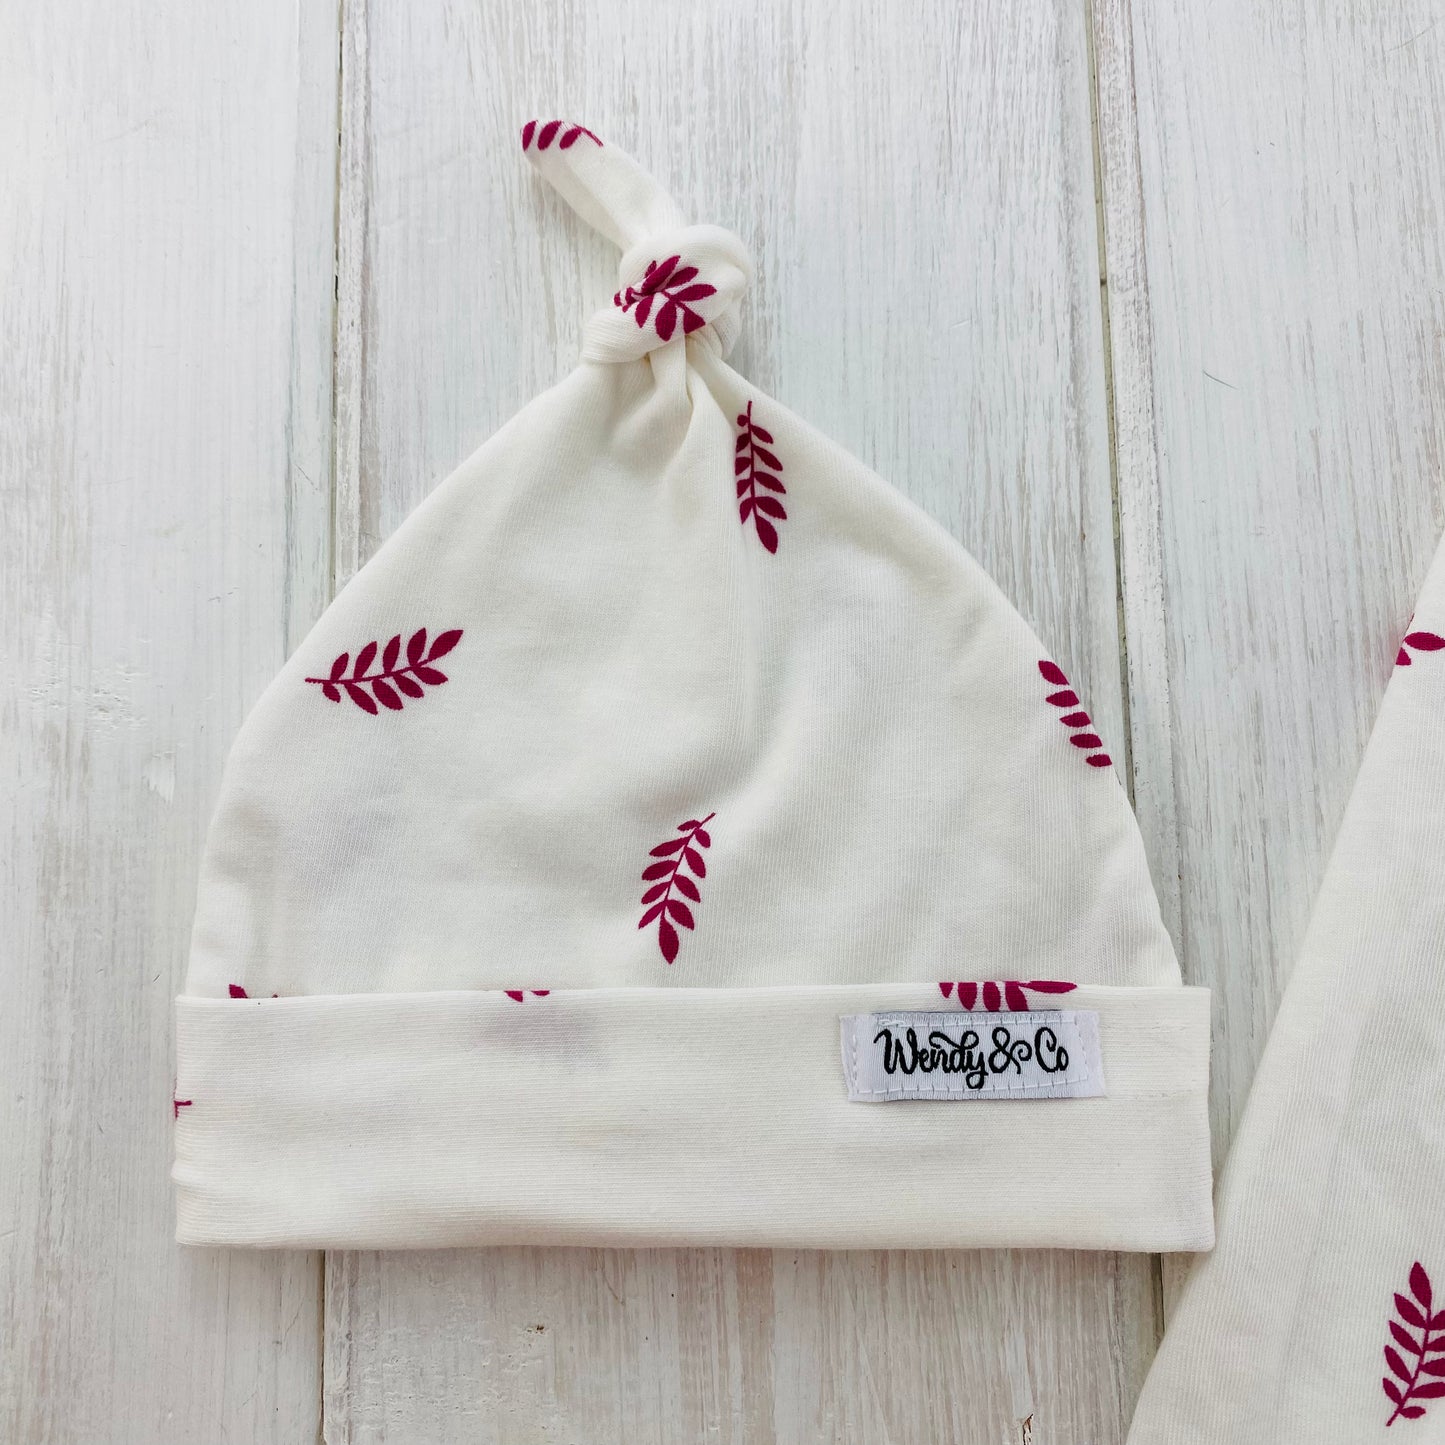 Delicate white with scattered raspberry leaves on newborn hat.